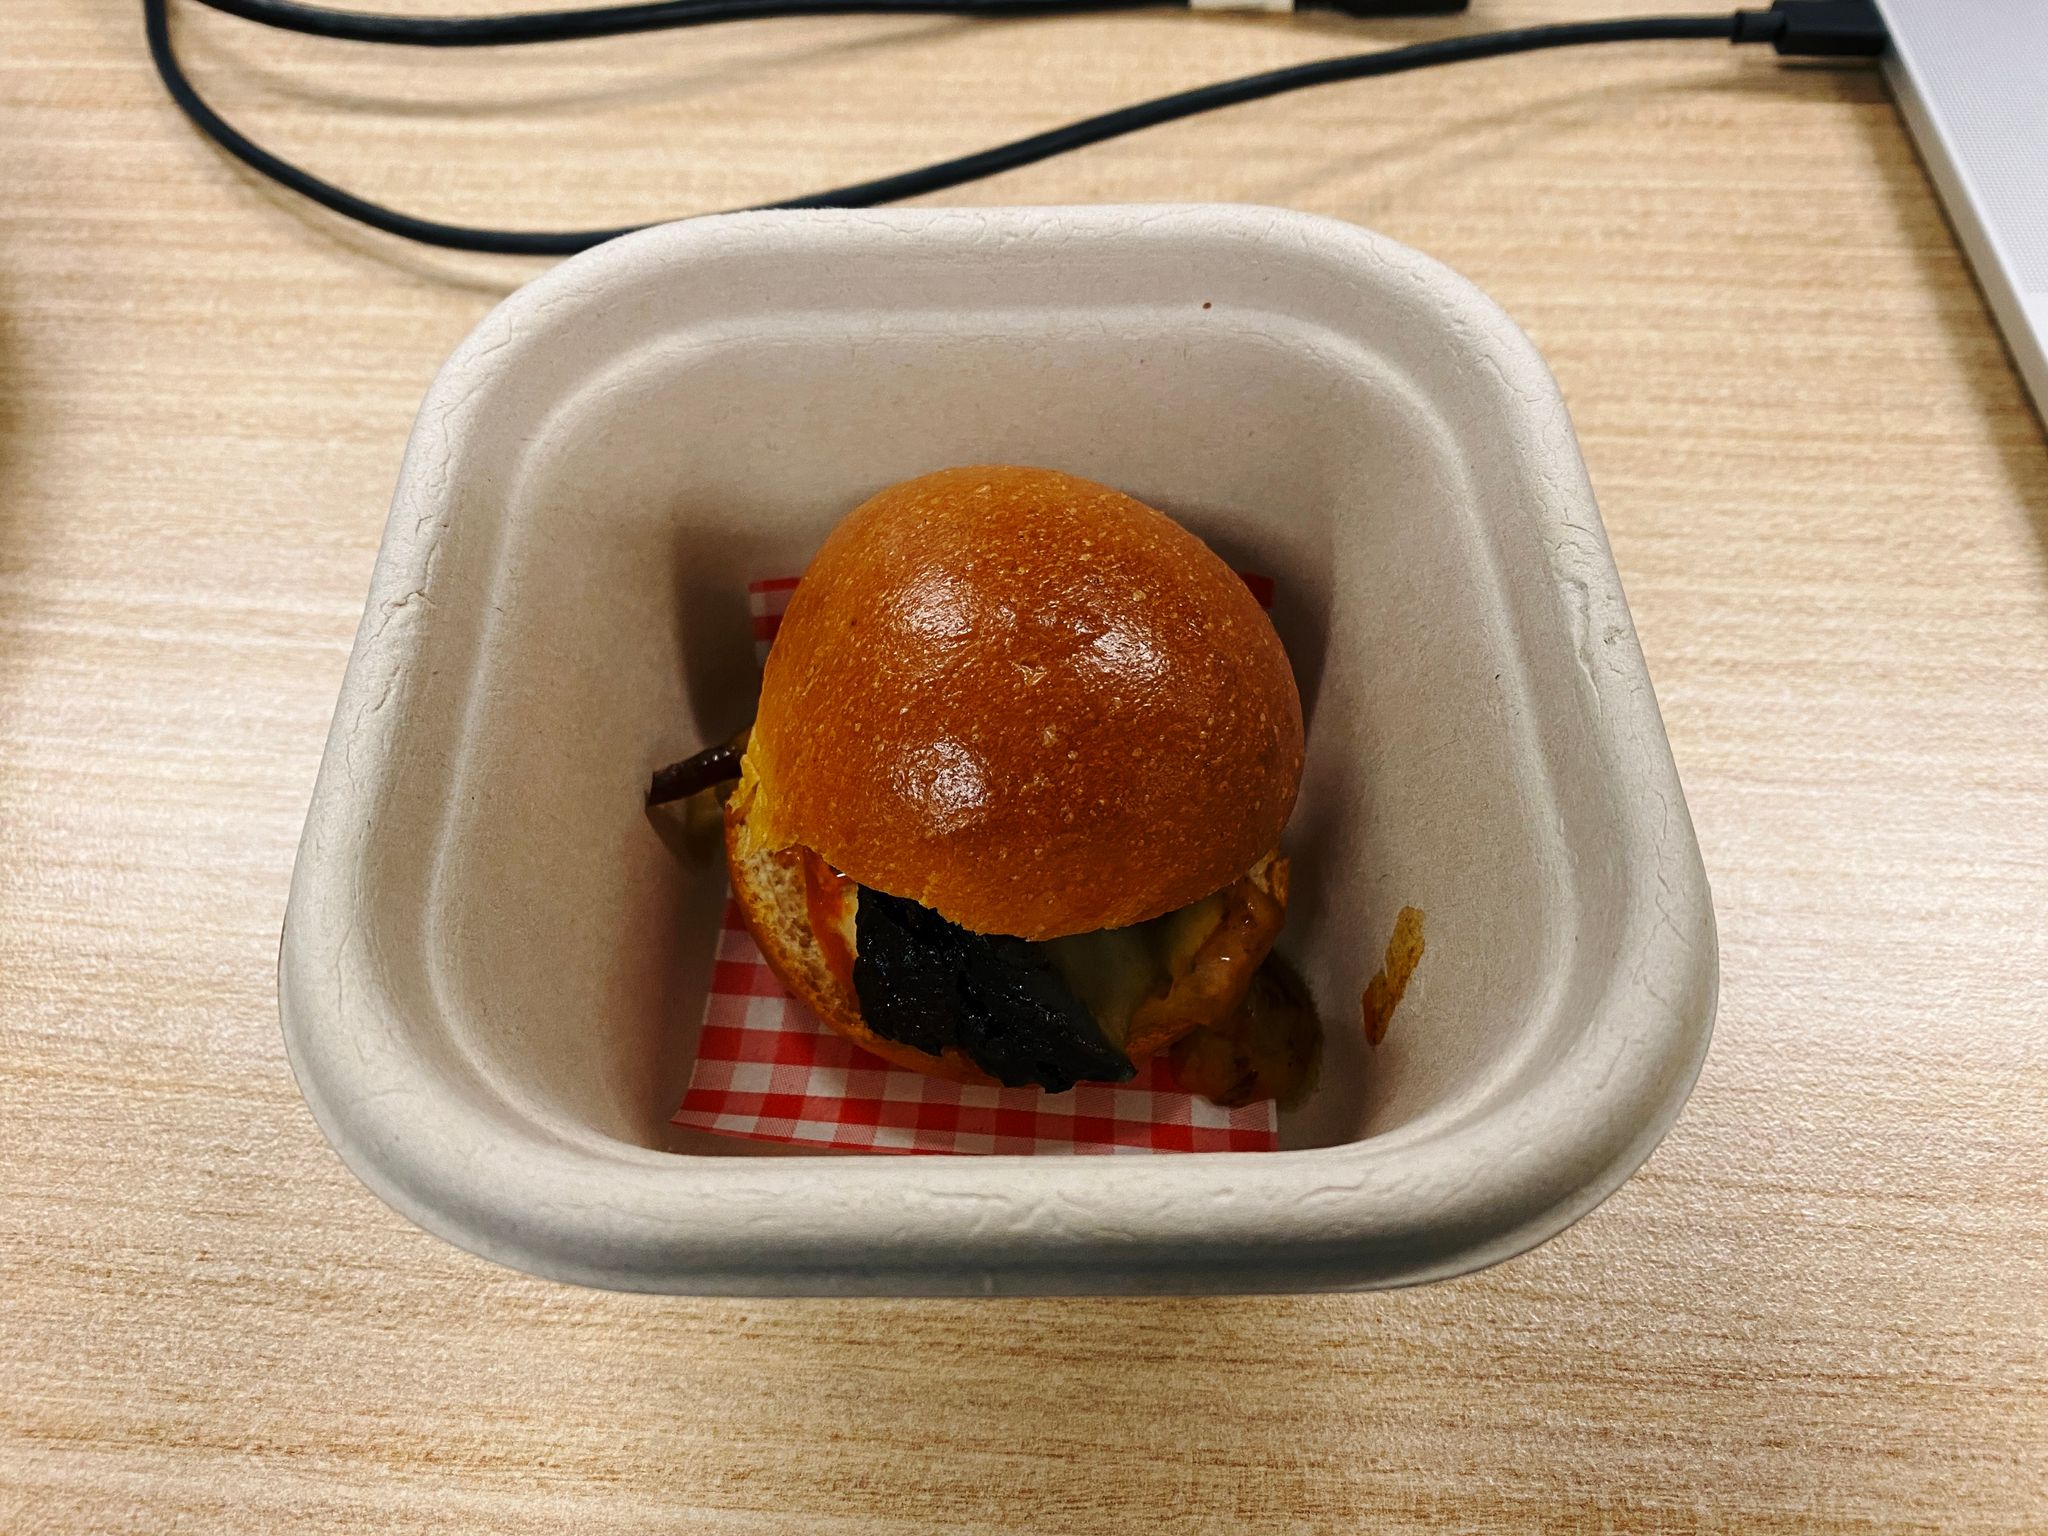 A photo of a tiny little slider sitting in a disposable cardboard container.